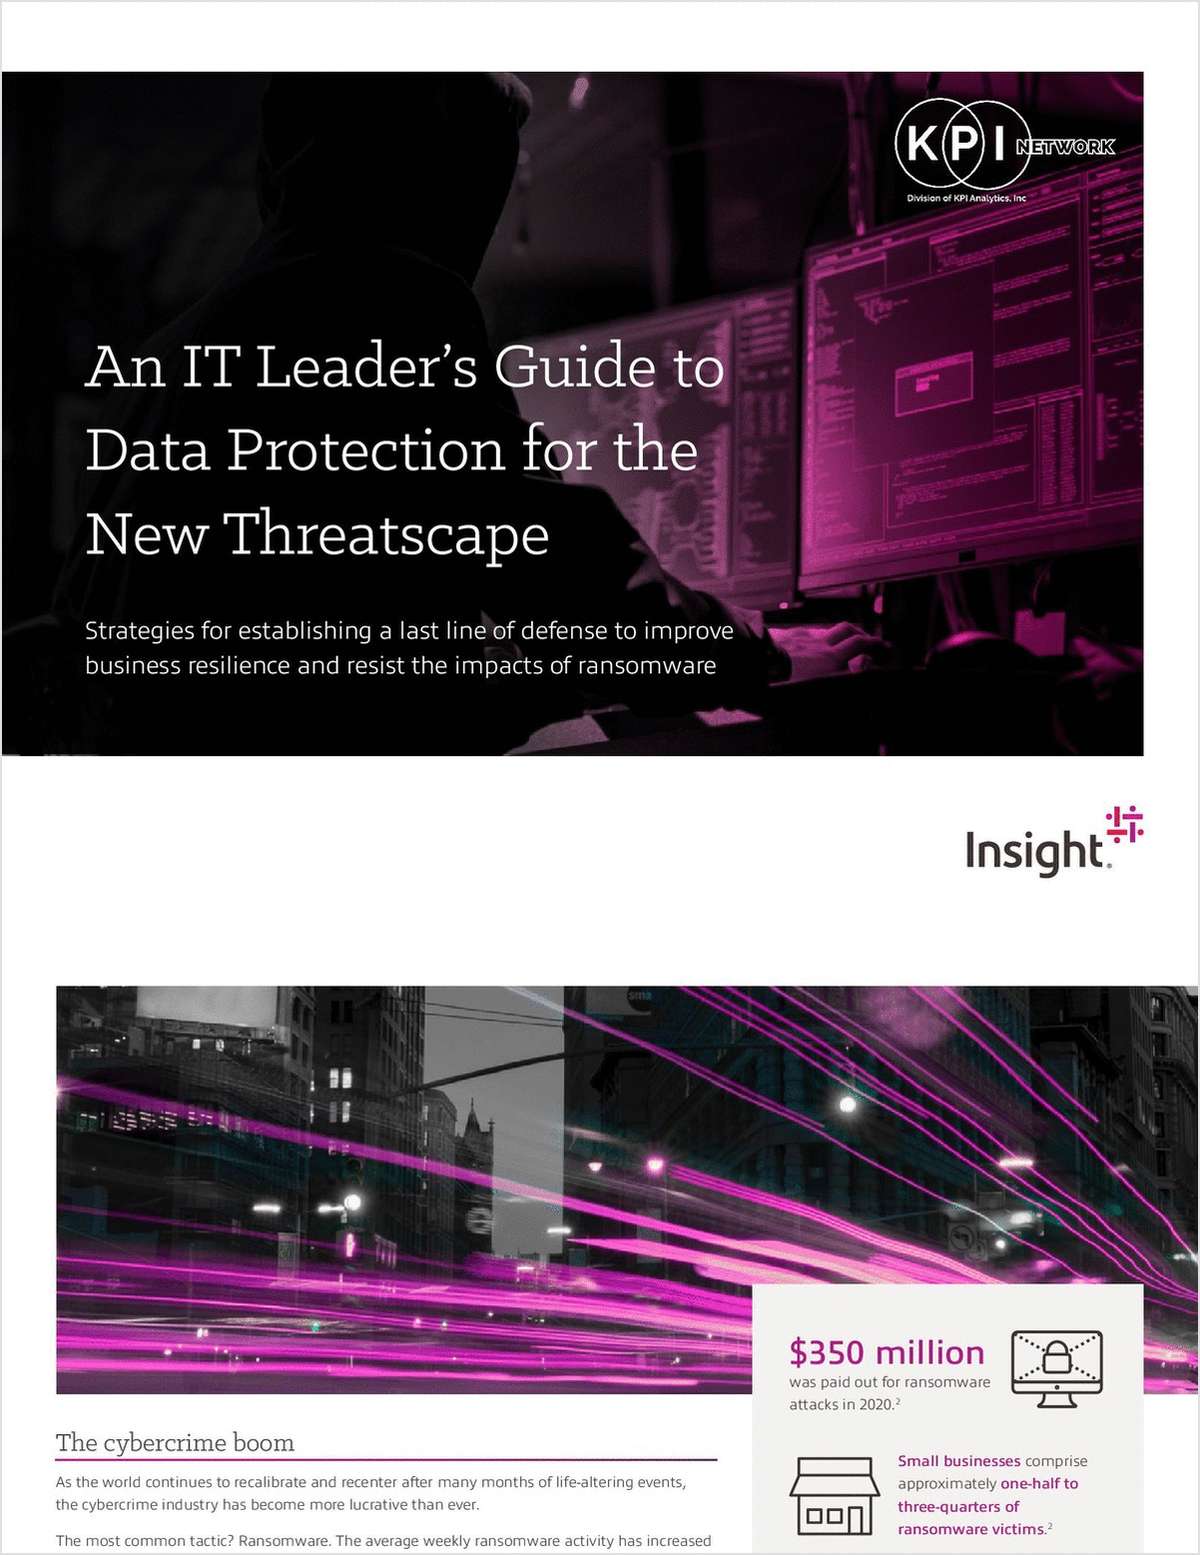 An IT Leader's Guide to Data Protection for the New Threatscape